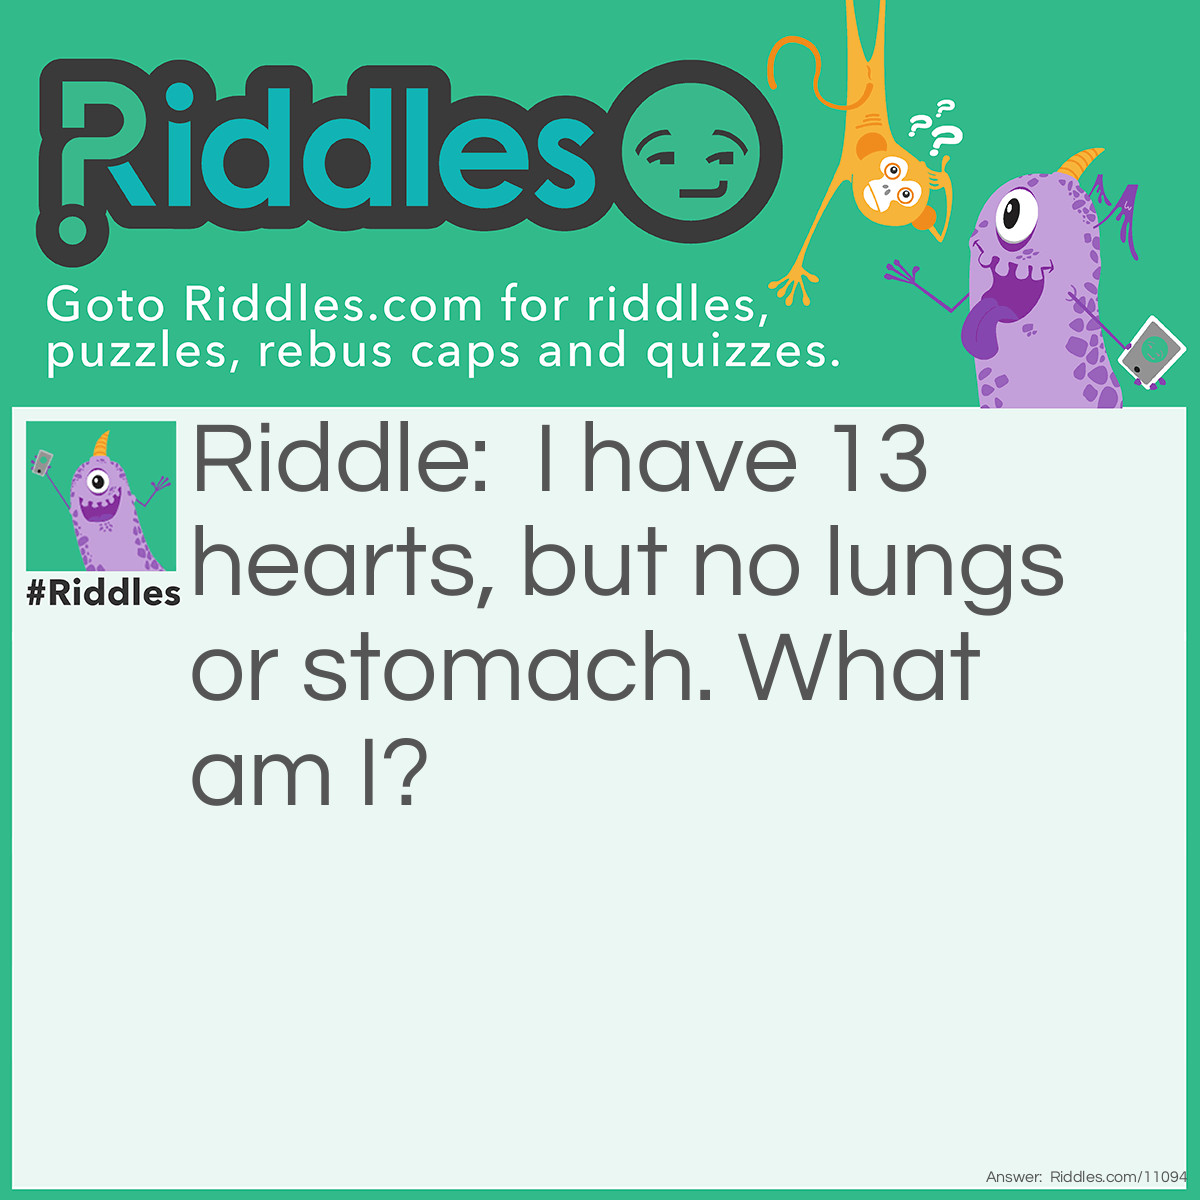 Riddle: I have 13 hearts, but no lungs or stomach. What am I? Answer: A deck of cards.